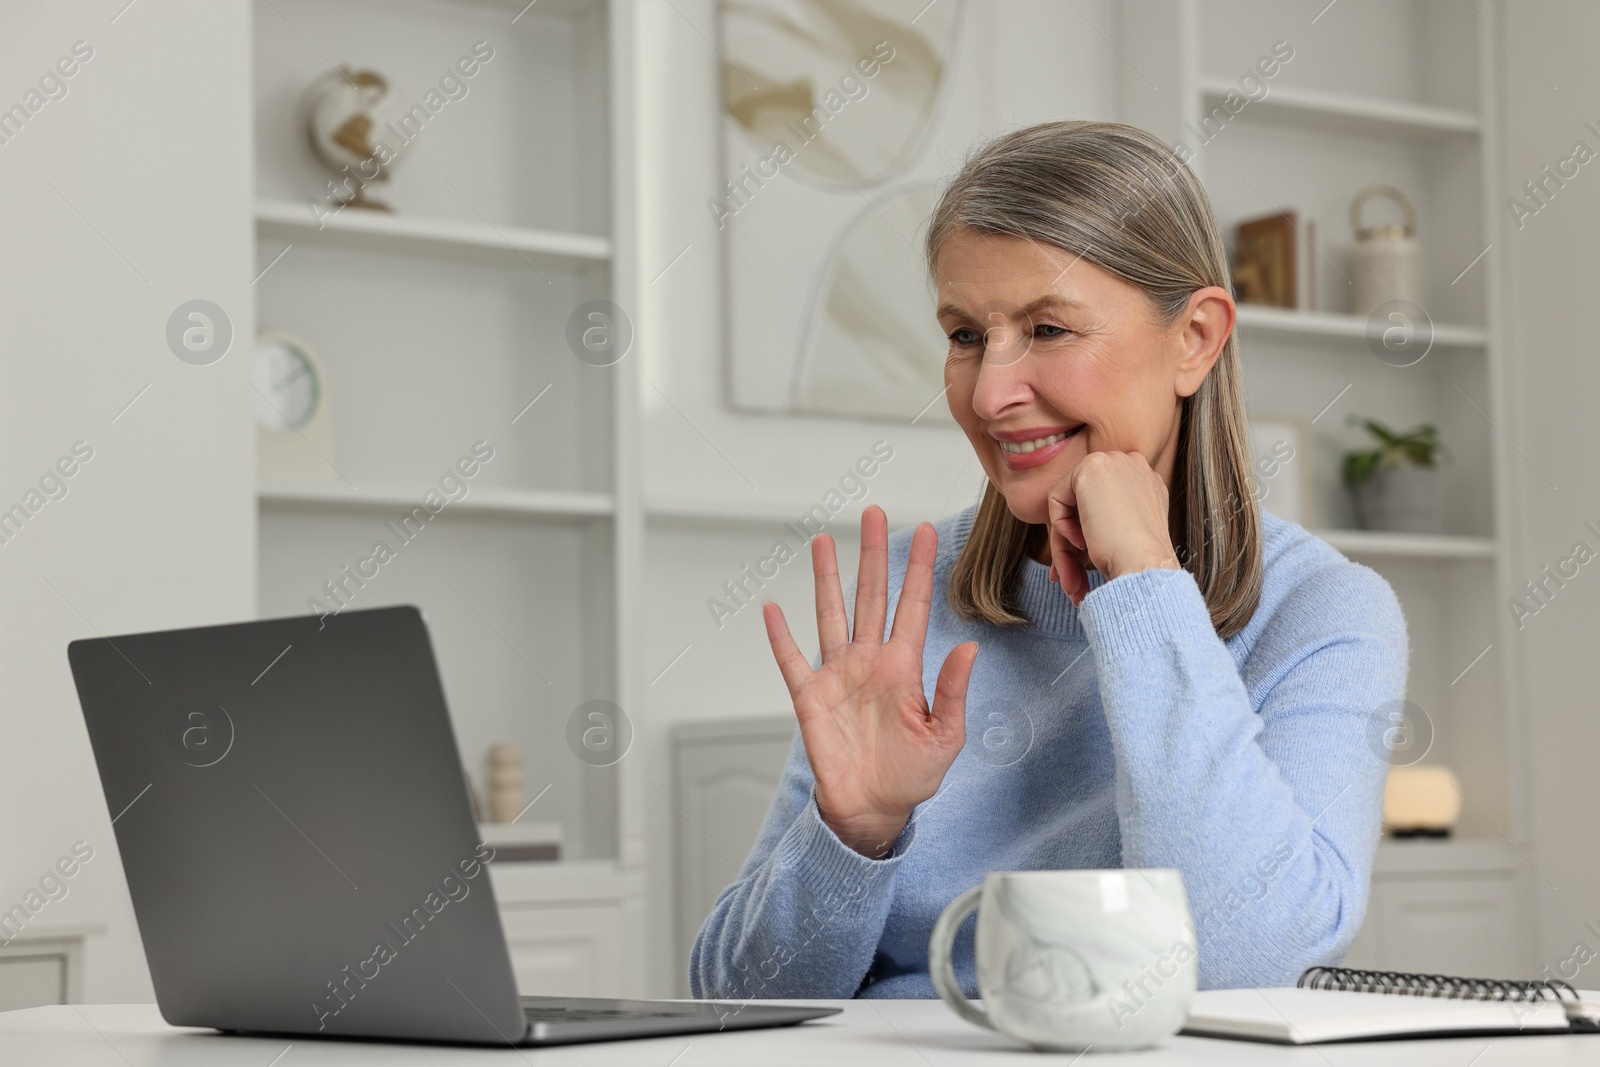 Photo of Happy woman waving hello during video call at table indoors